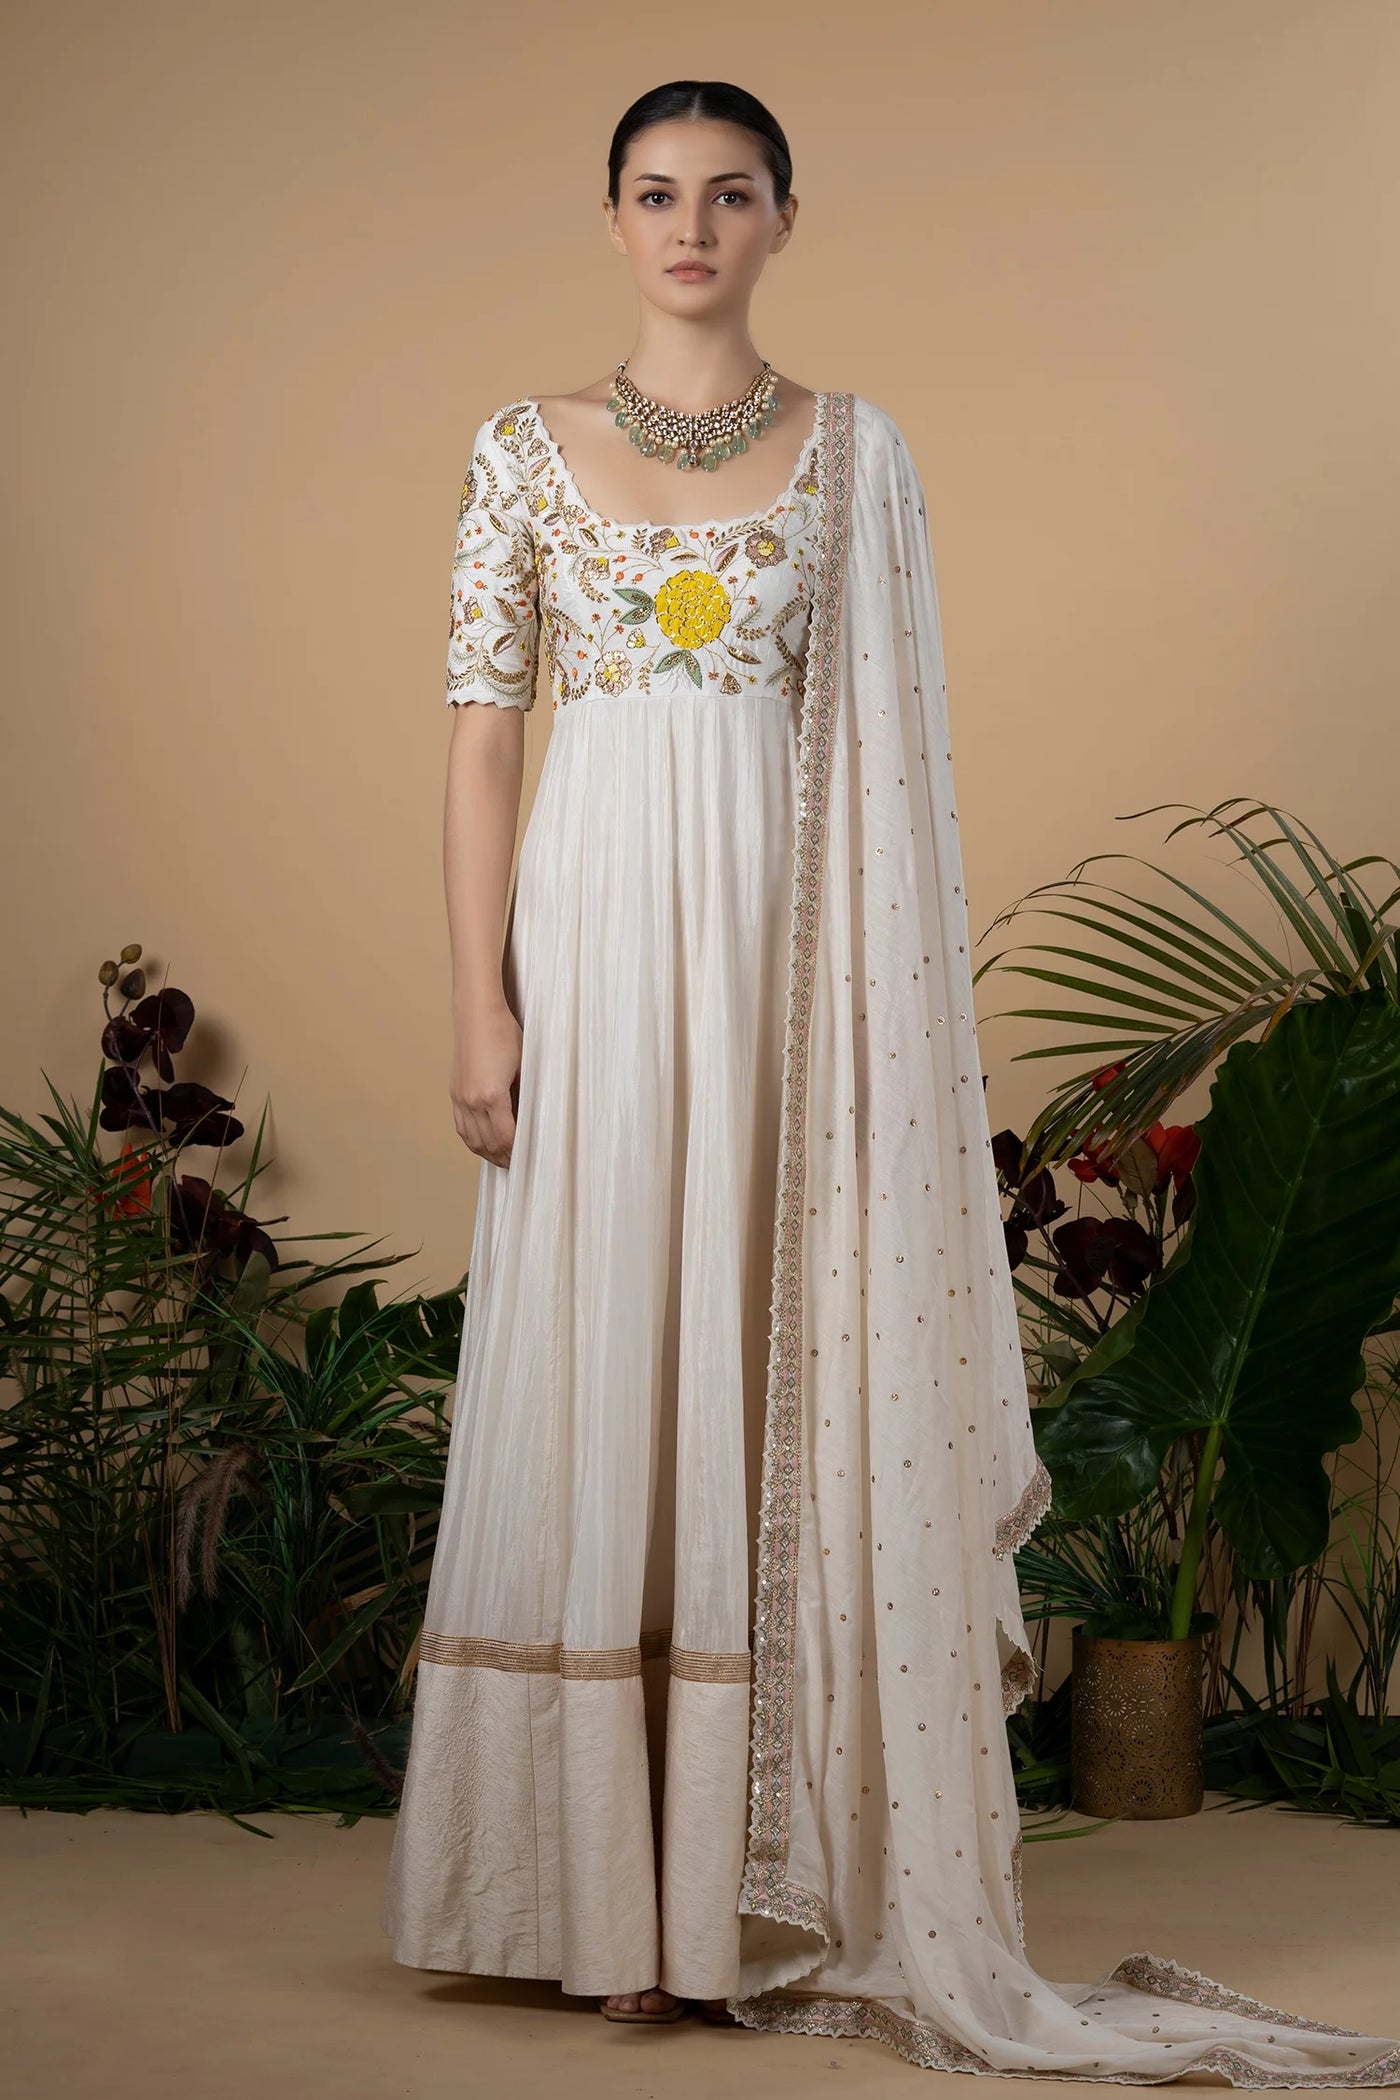 White Chennur Anarkali Set Indian Clothing in Denver, CO, Aurora, CO, Boulder, CO, Fort Collins, CO, Colorado Springs, CO, Parker, CO, Highlands Ranch, CO, Cherry Creek, CO, Centennial, CO, and Longmont, CO. NATIONWIDE SHIPPING USA- India Fashion X